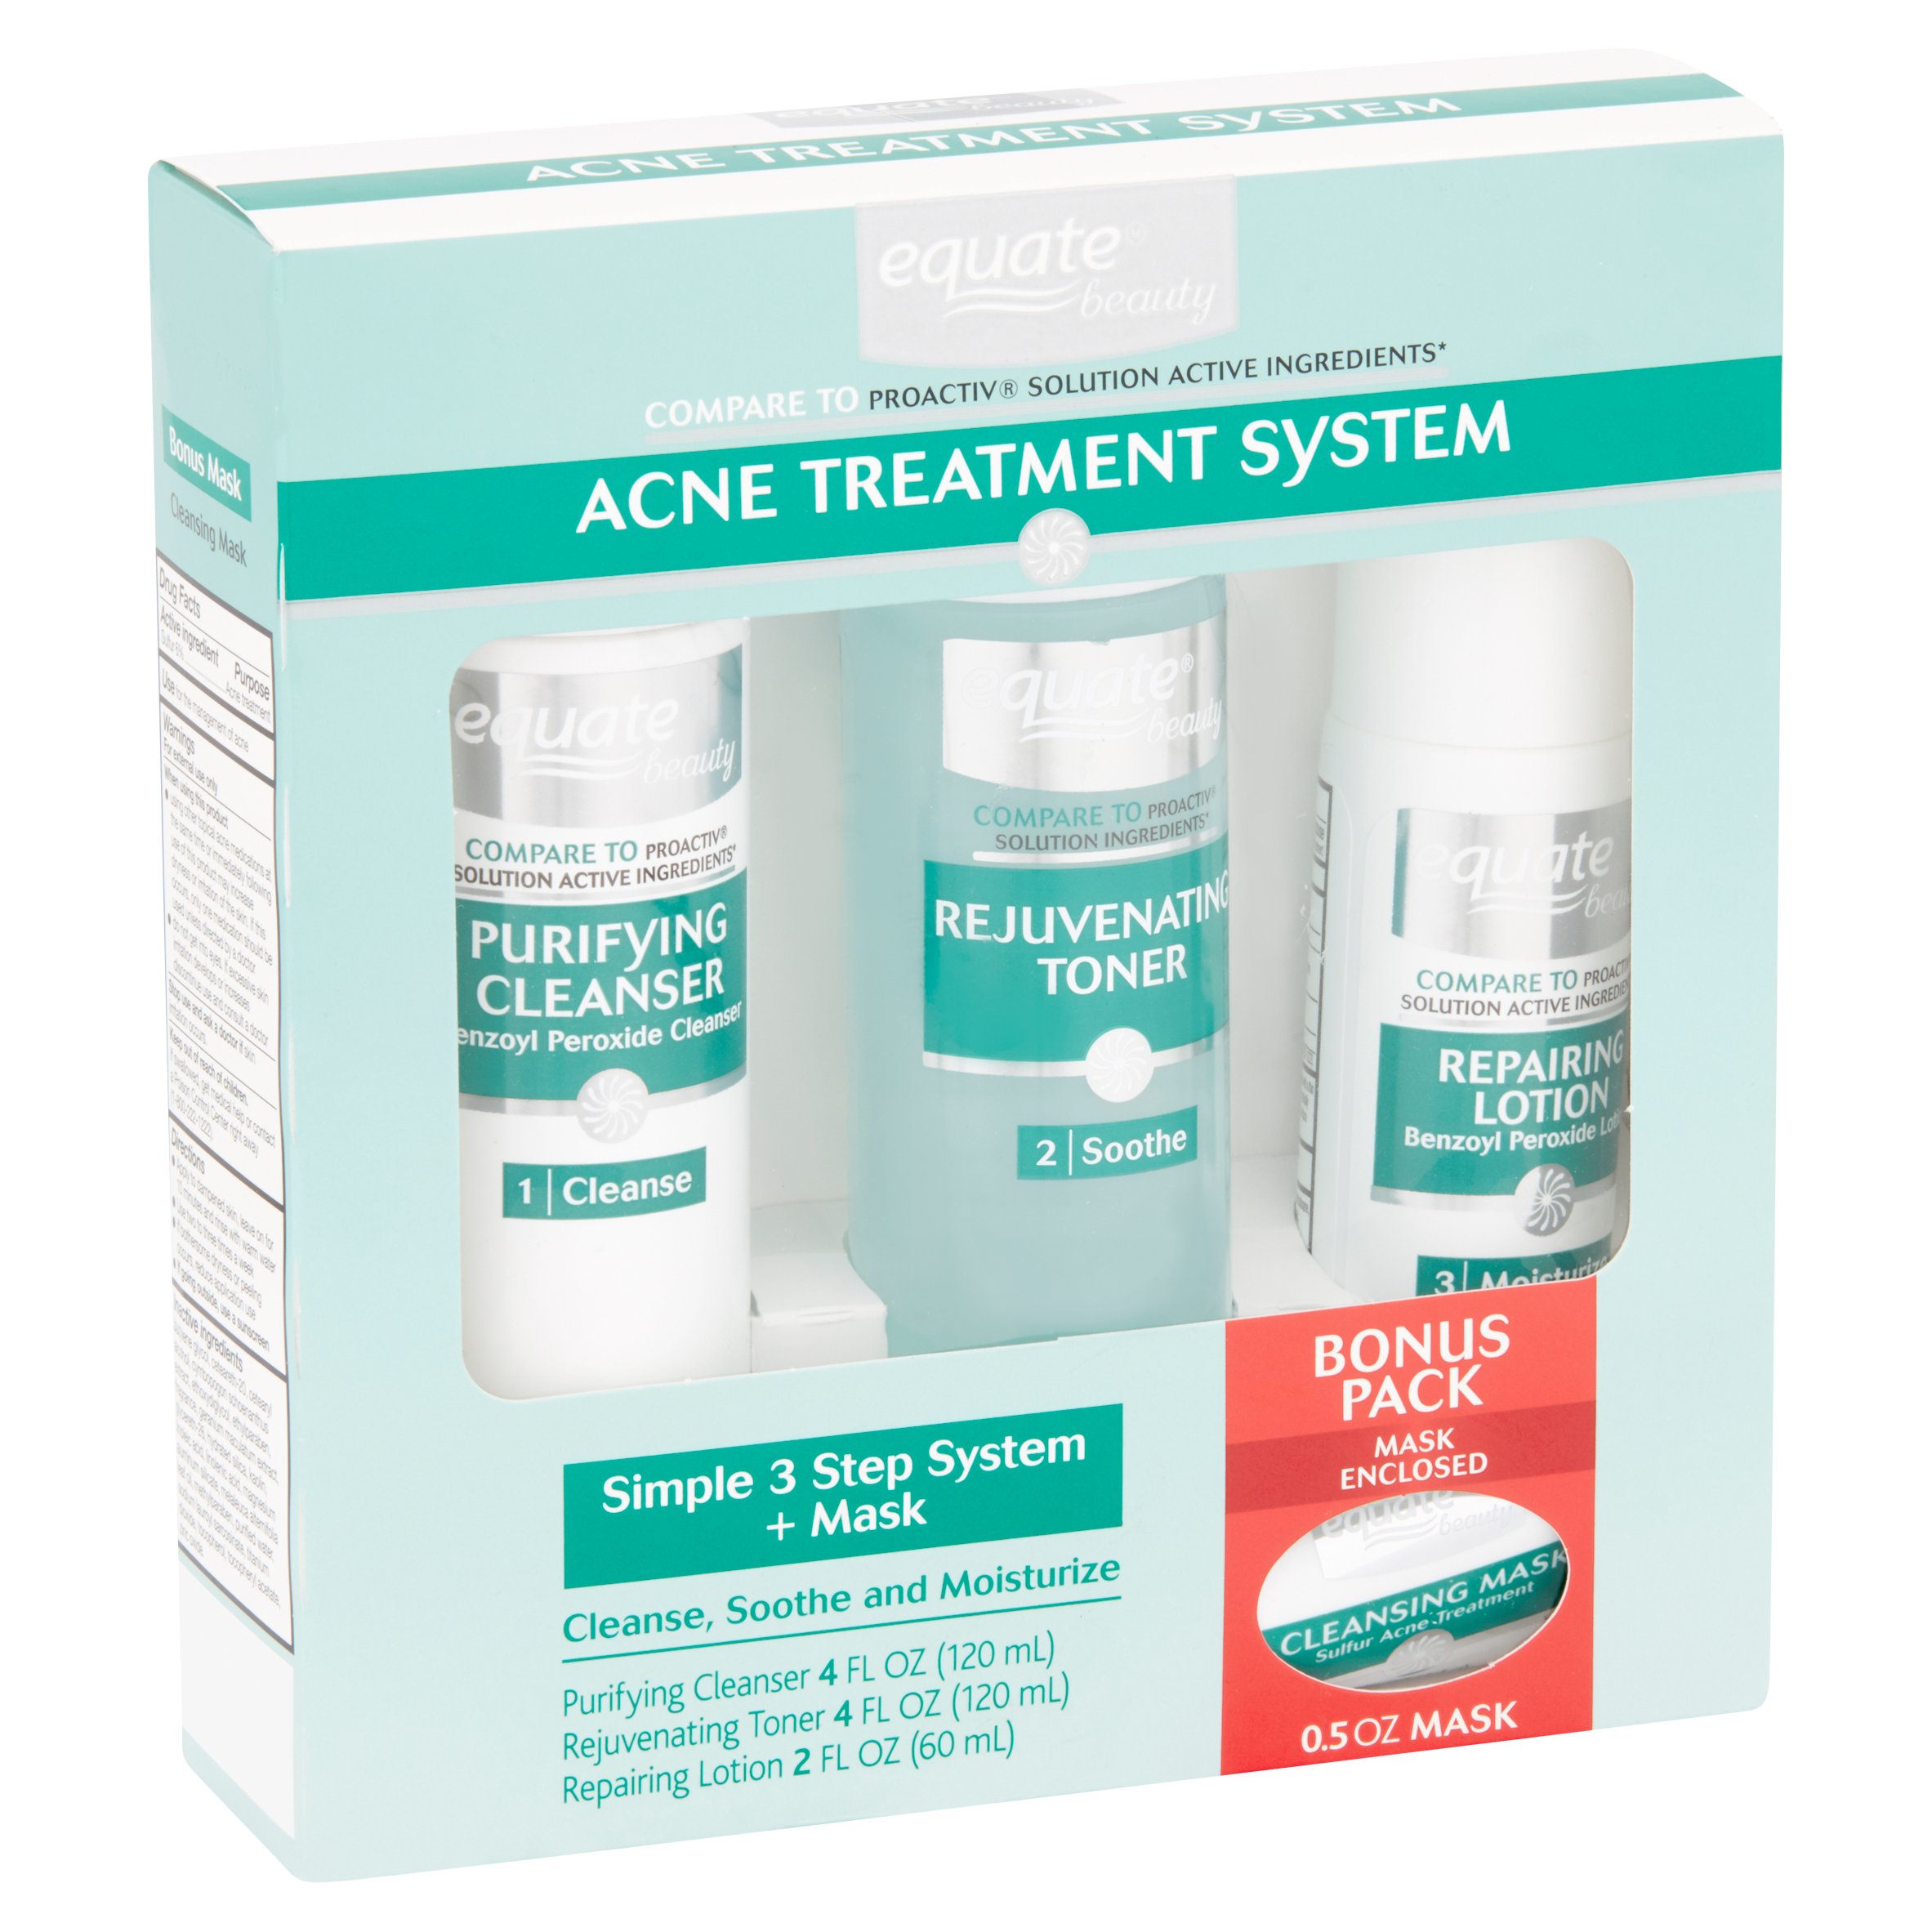 Equate Acne Treatment System - image 2 of 5